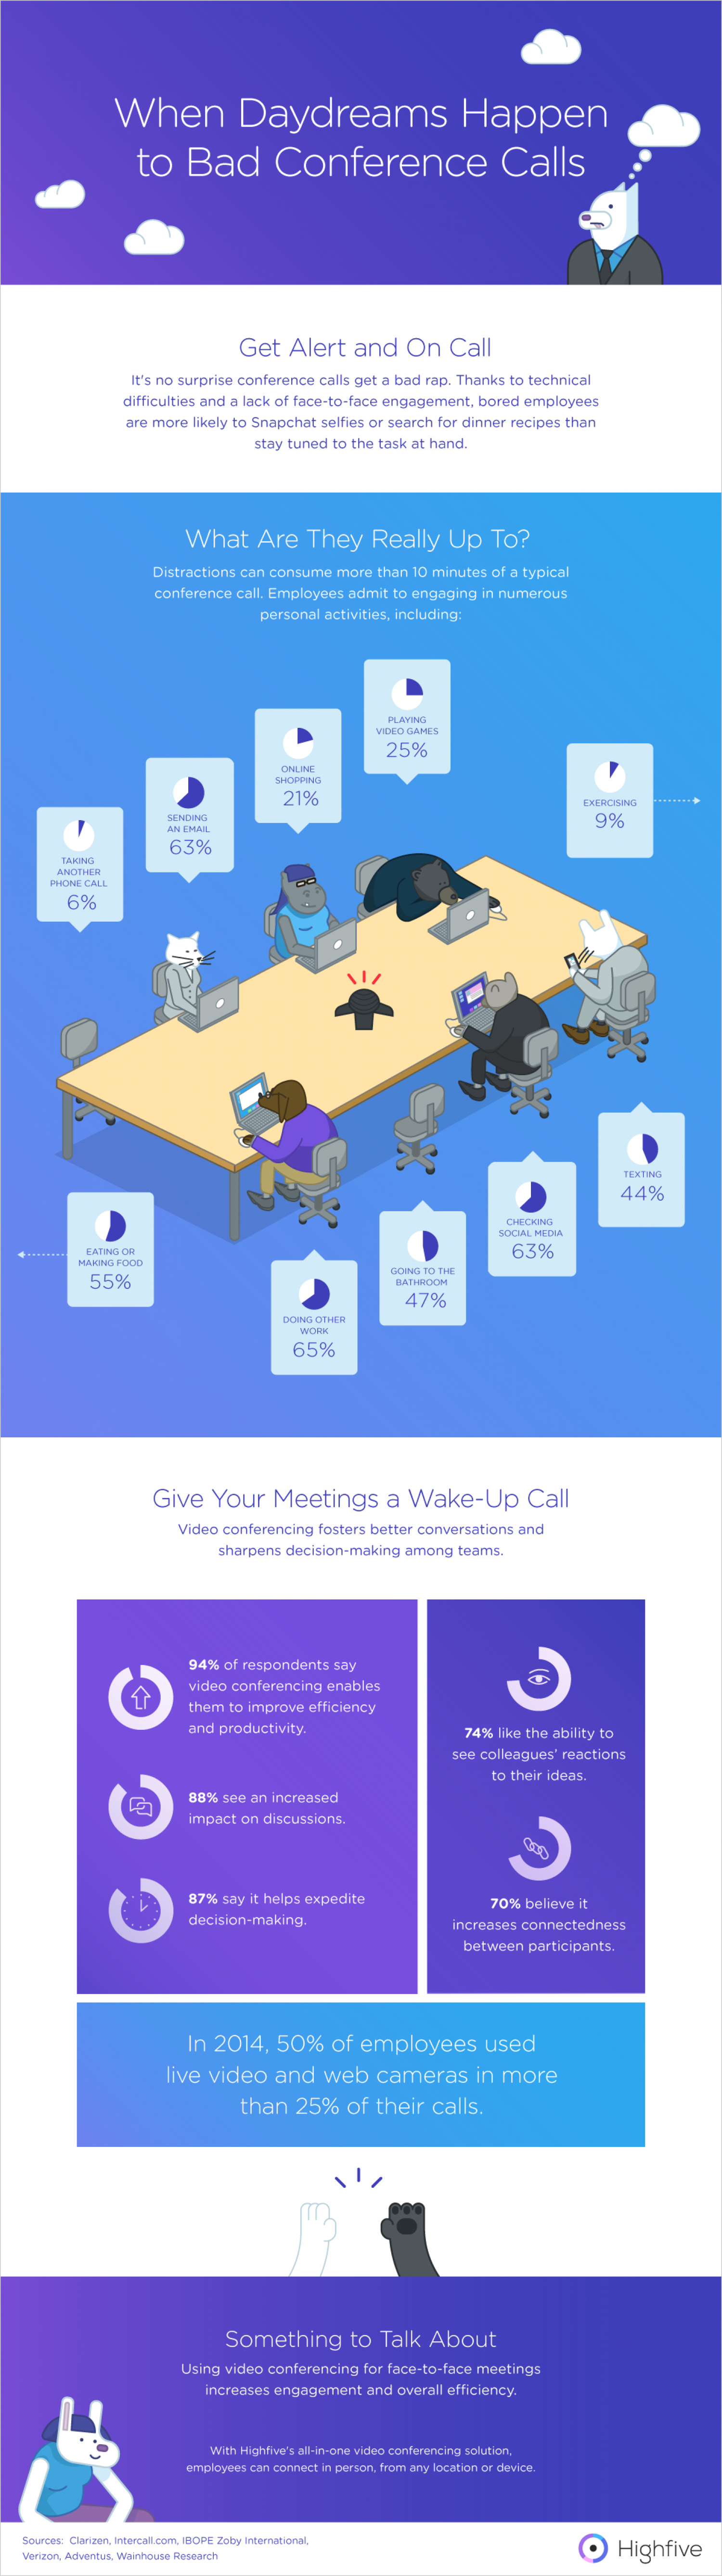 When Daydreams Happen To Bad Conference Calls Infographic